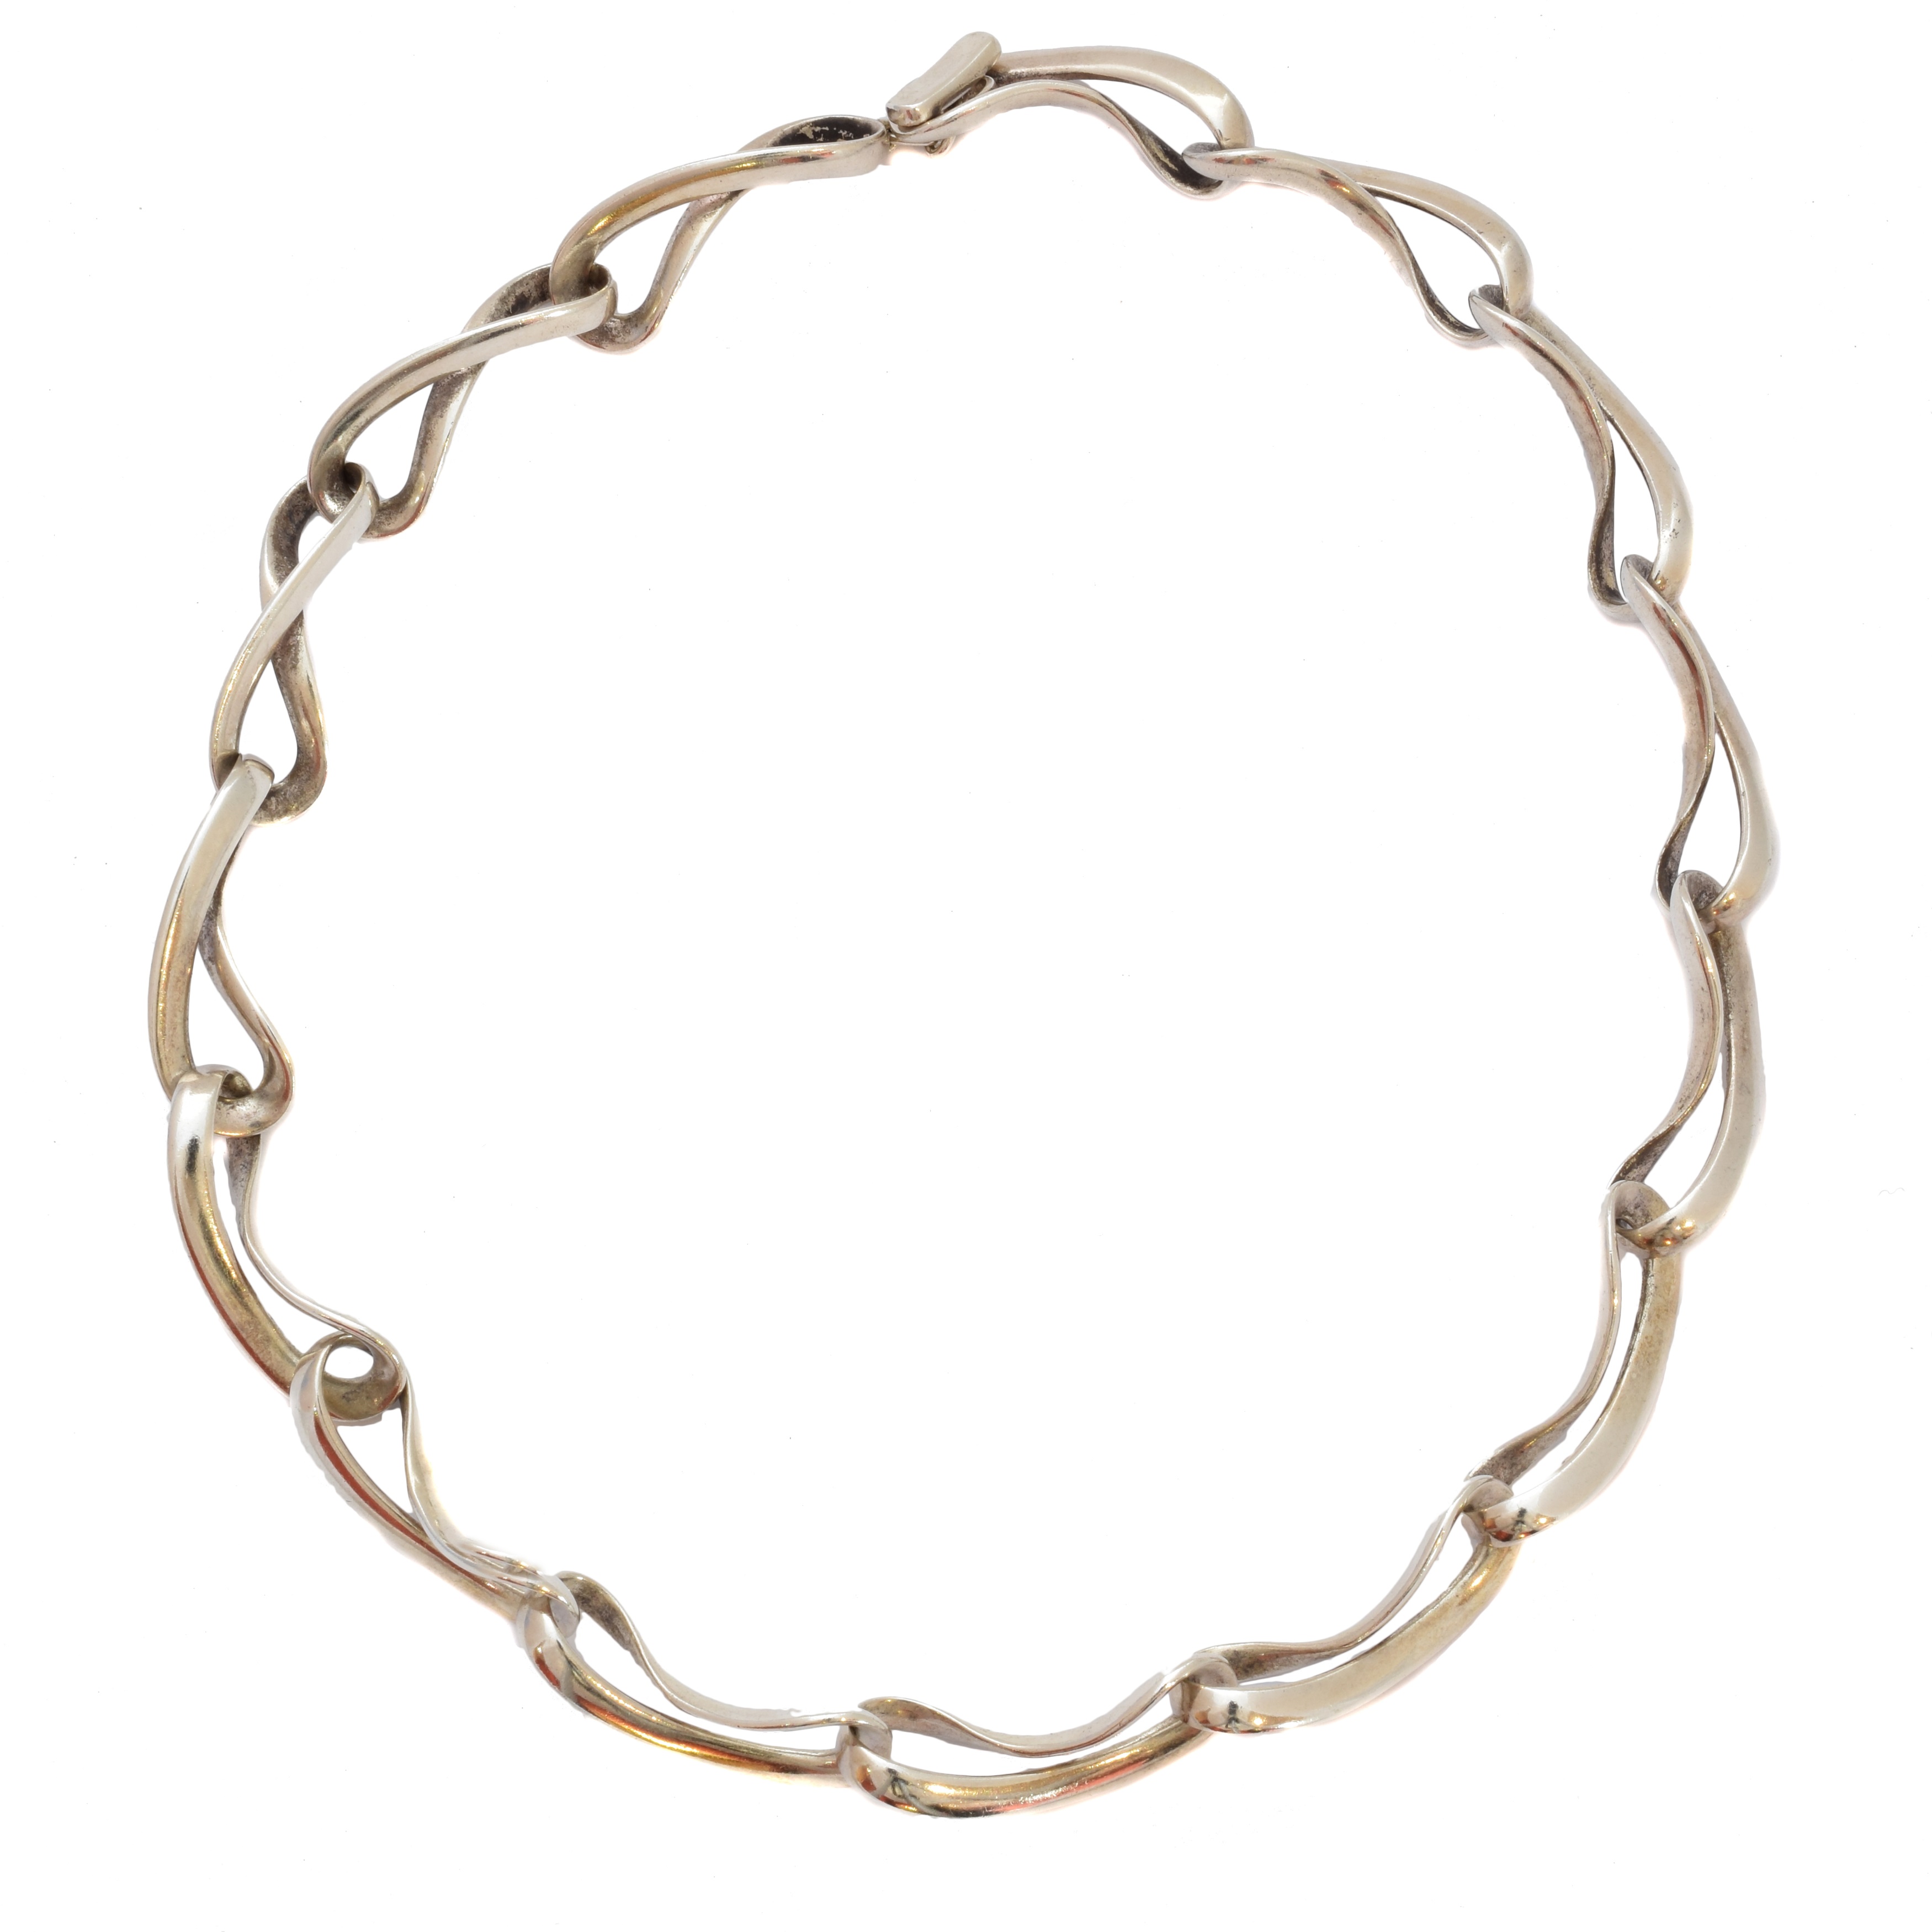 A Georg Jensen 'Infinity' necklace, no. 452